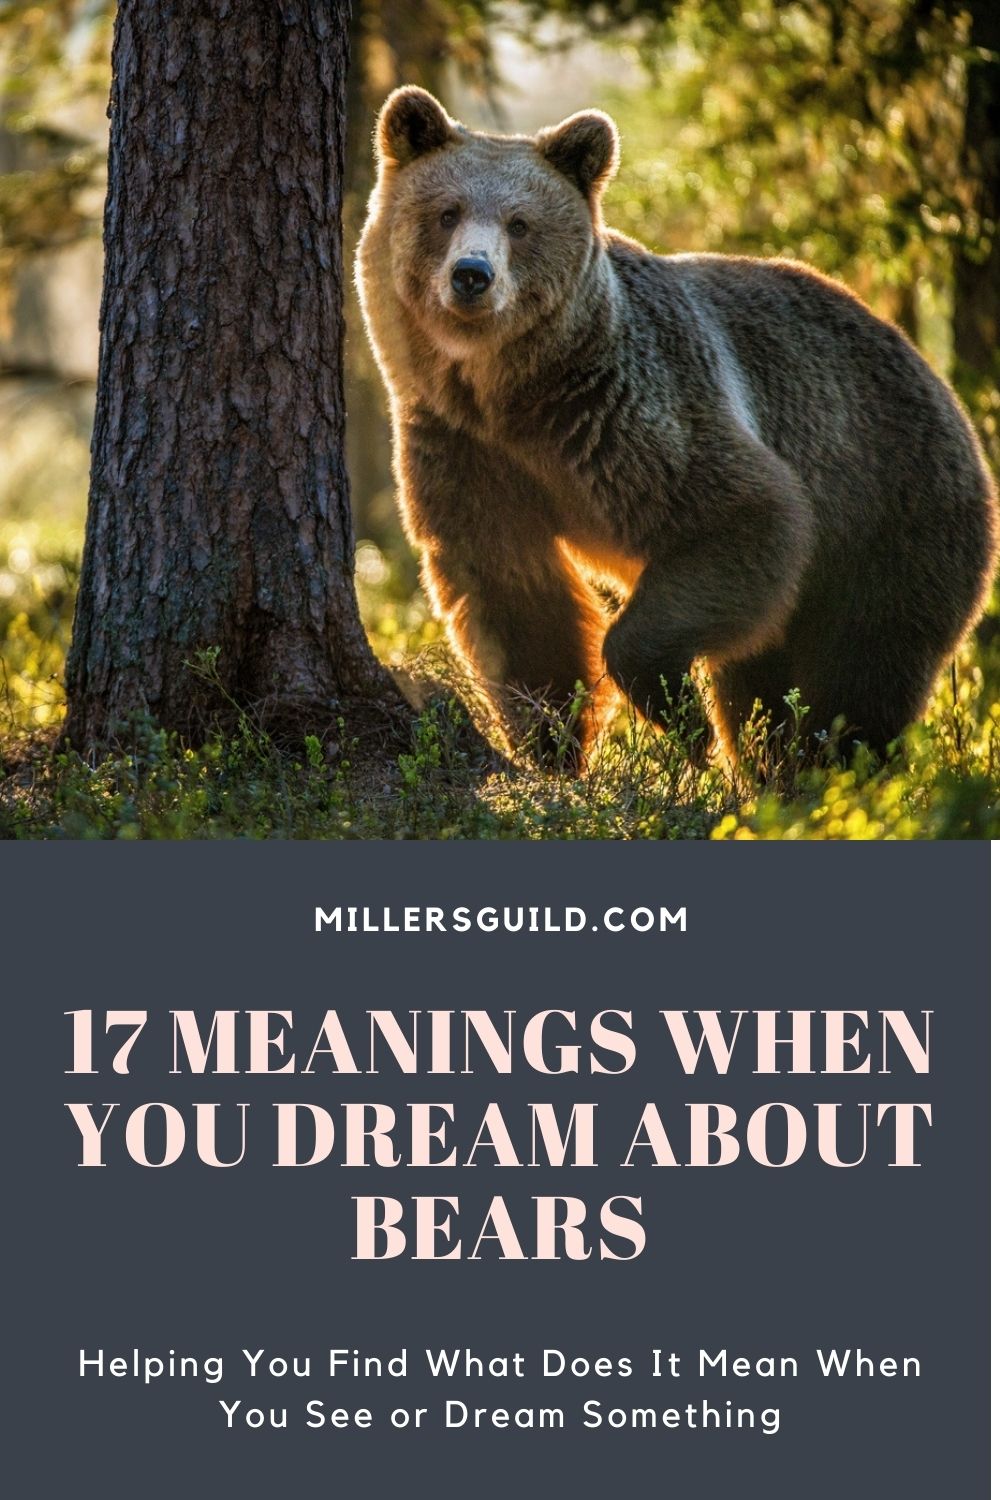 Bear - Dream Meaning and Symbolism